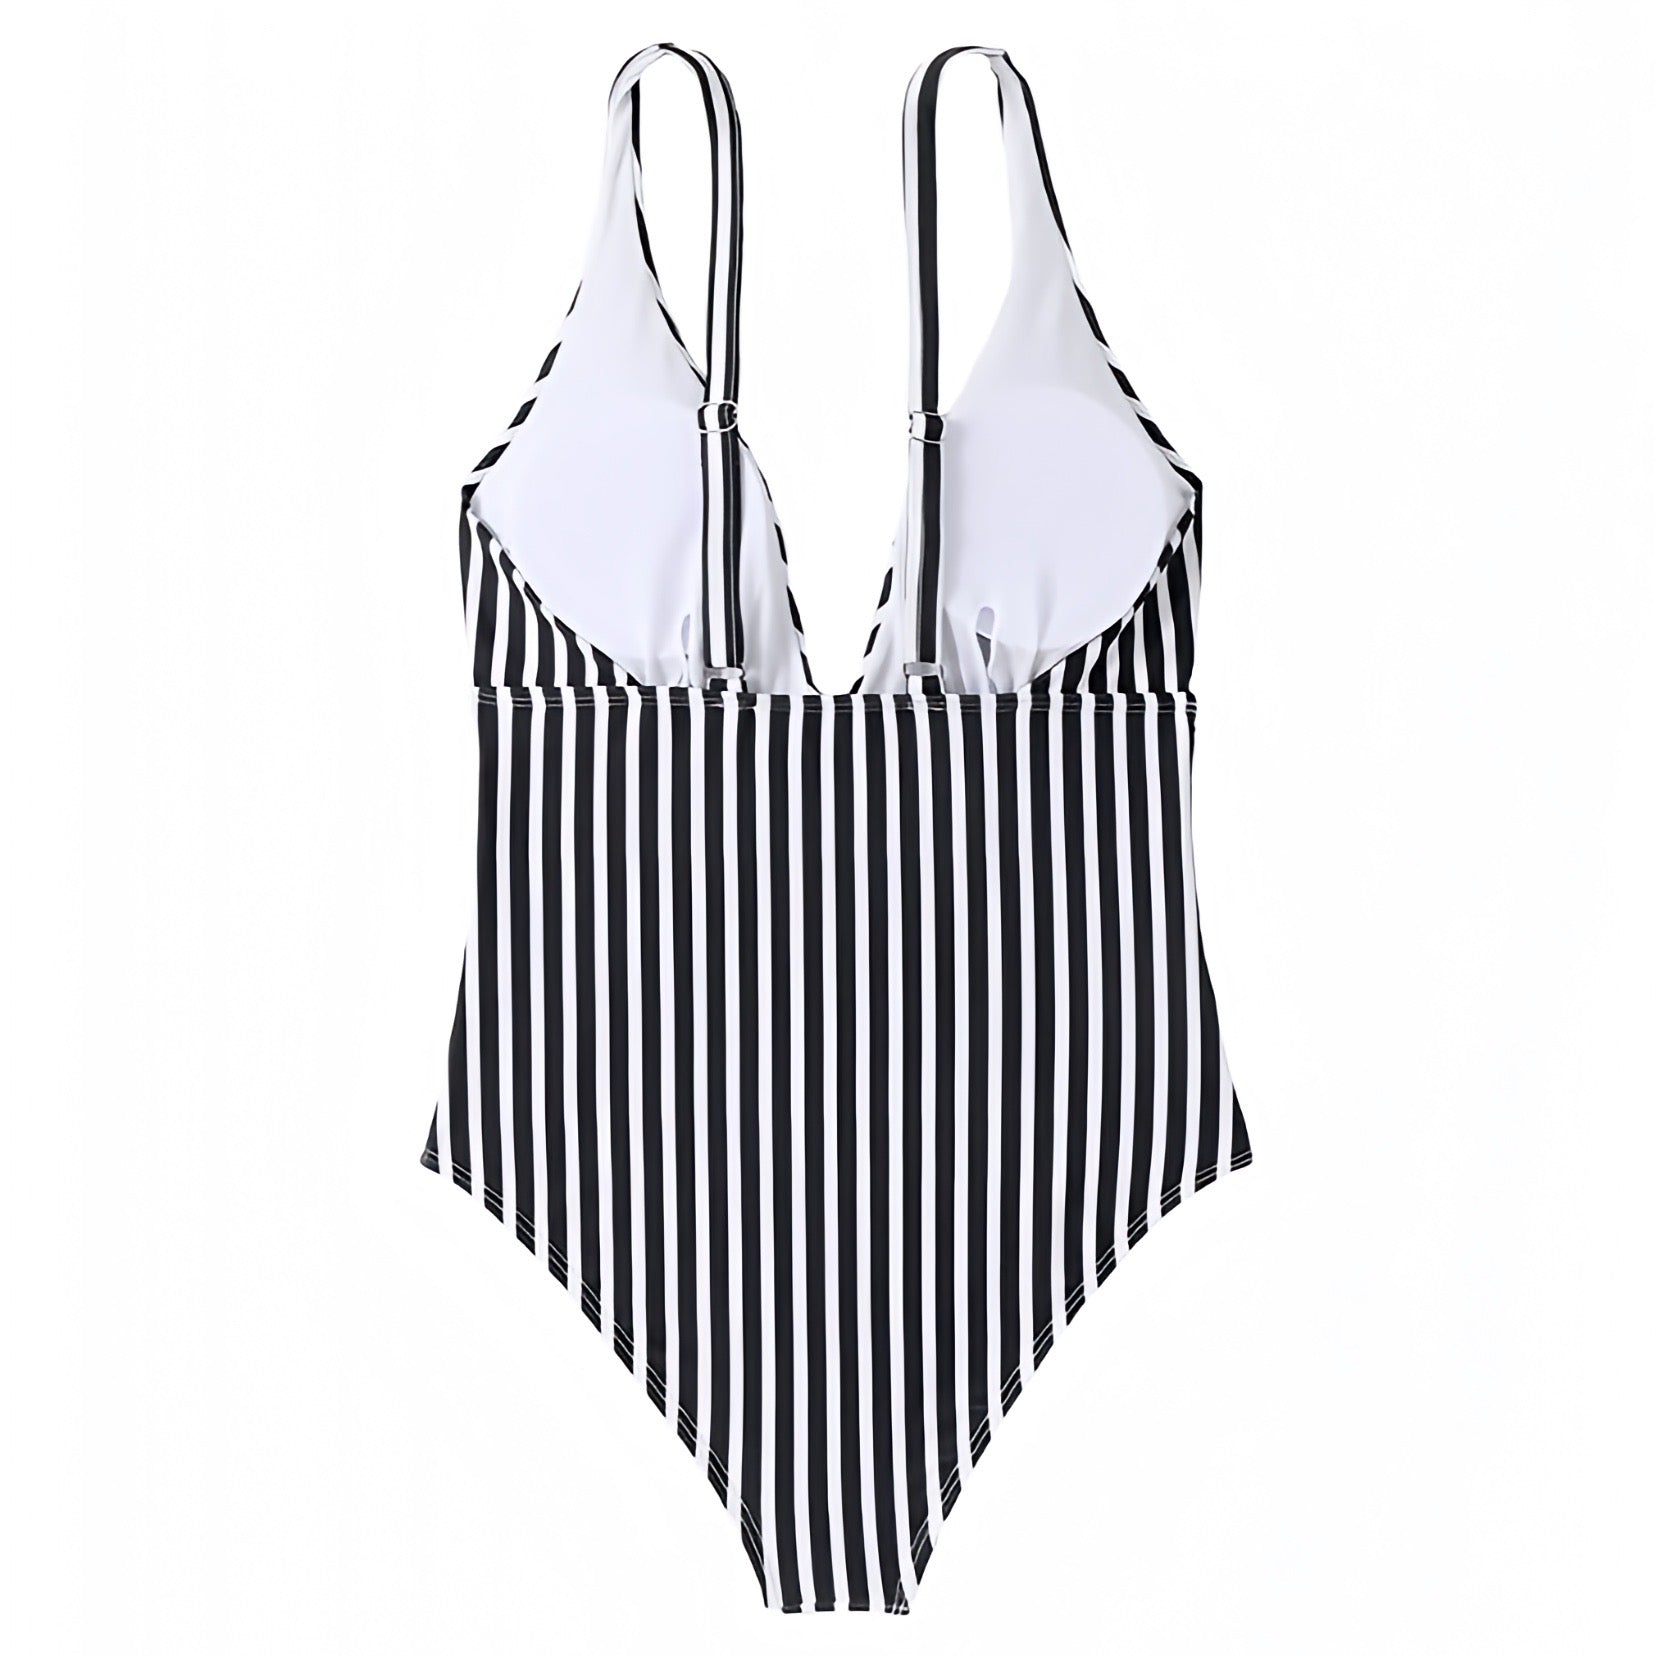 black-and-white-striped-seersucker-pinstriped-patterned-slim-fit-bodycon-cut-out-v-neck-spaghetti-strap-sleeveless-backless-open-back-wireless-push-up-cheeky-thong-modest-one-piece-swimsuit-swimwear-bathing-suit-women-ladies-teens-tweens-chic-trendy-spring-2024-summer-elegant-classic-feminine-classy-preppy-style-european-vacation-coastal-granddaughter-grandmillennial-beach-wear-revolve-minow-oneone-frankies-bikinis-blackbough-kulakinis-same-dupe